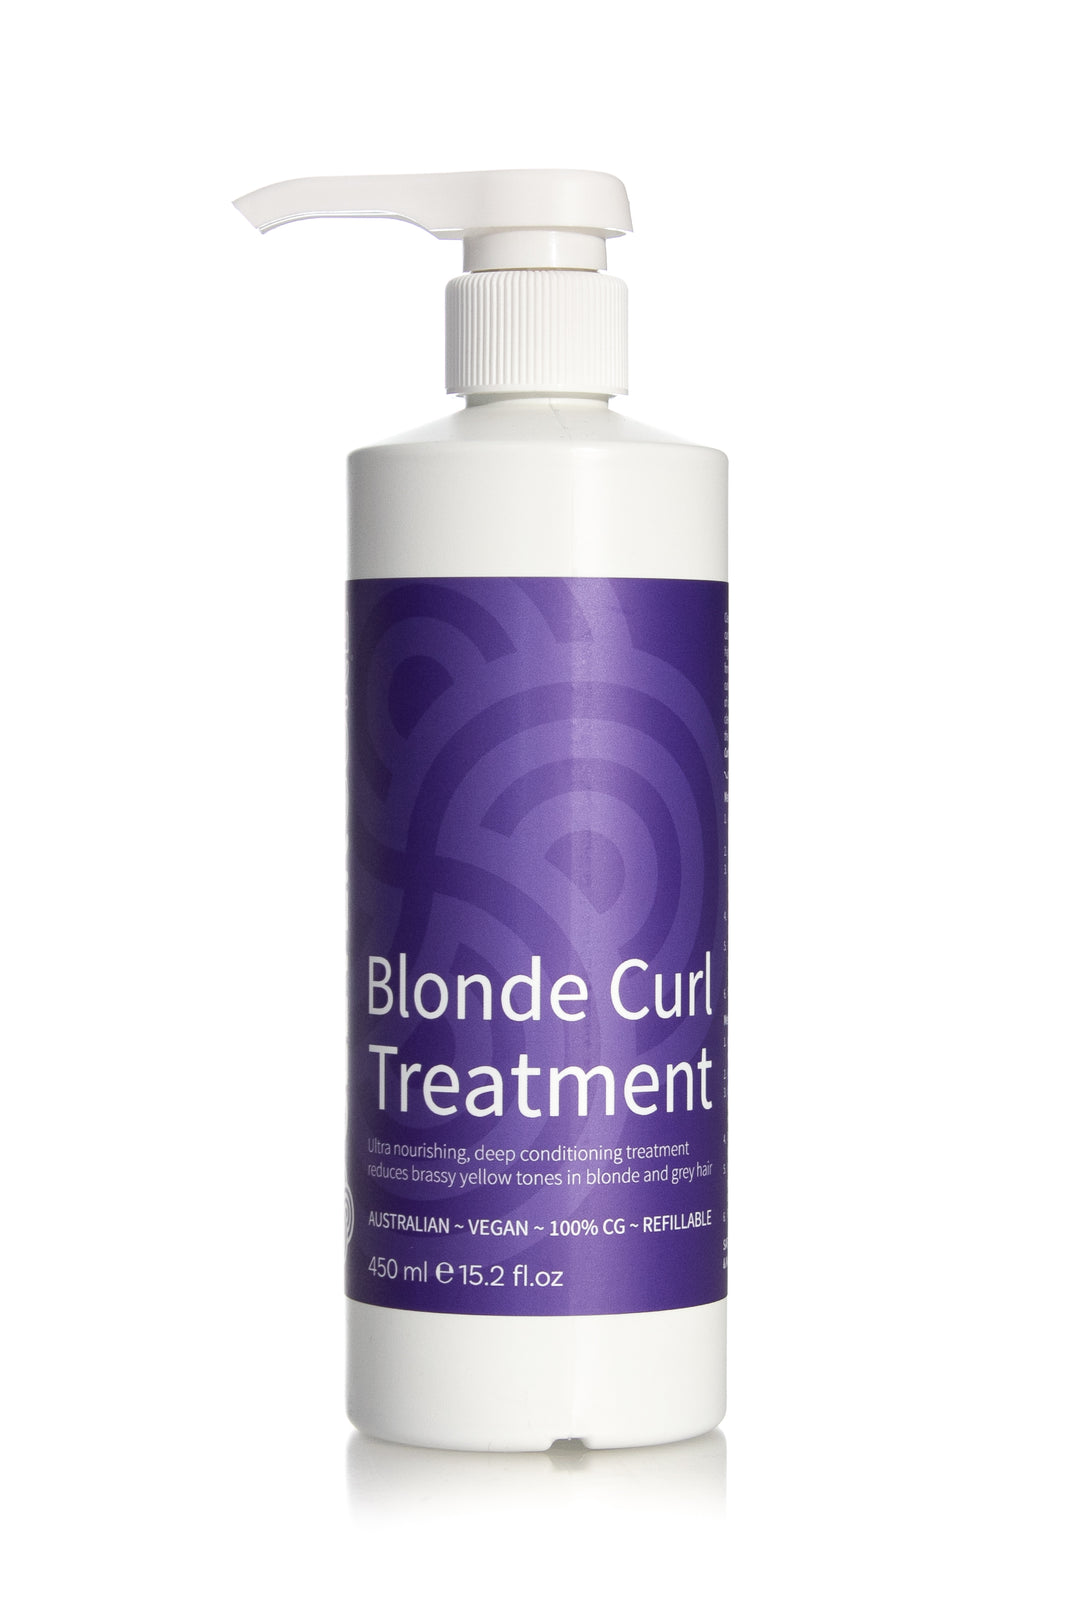 CLEVER CURL Blonde Curl Treatment | Various Sizes